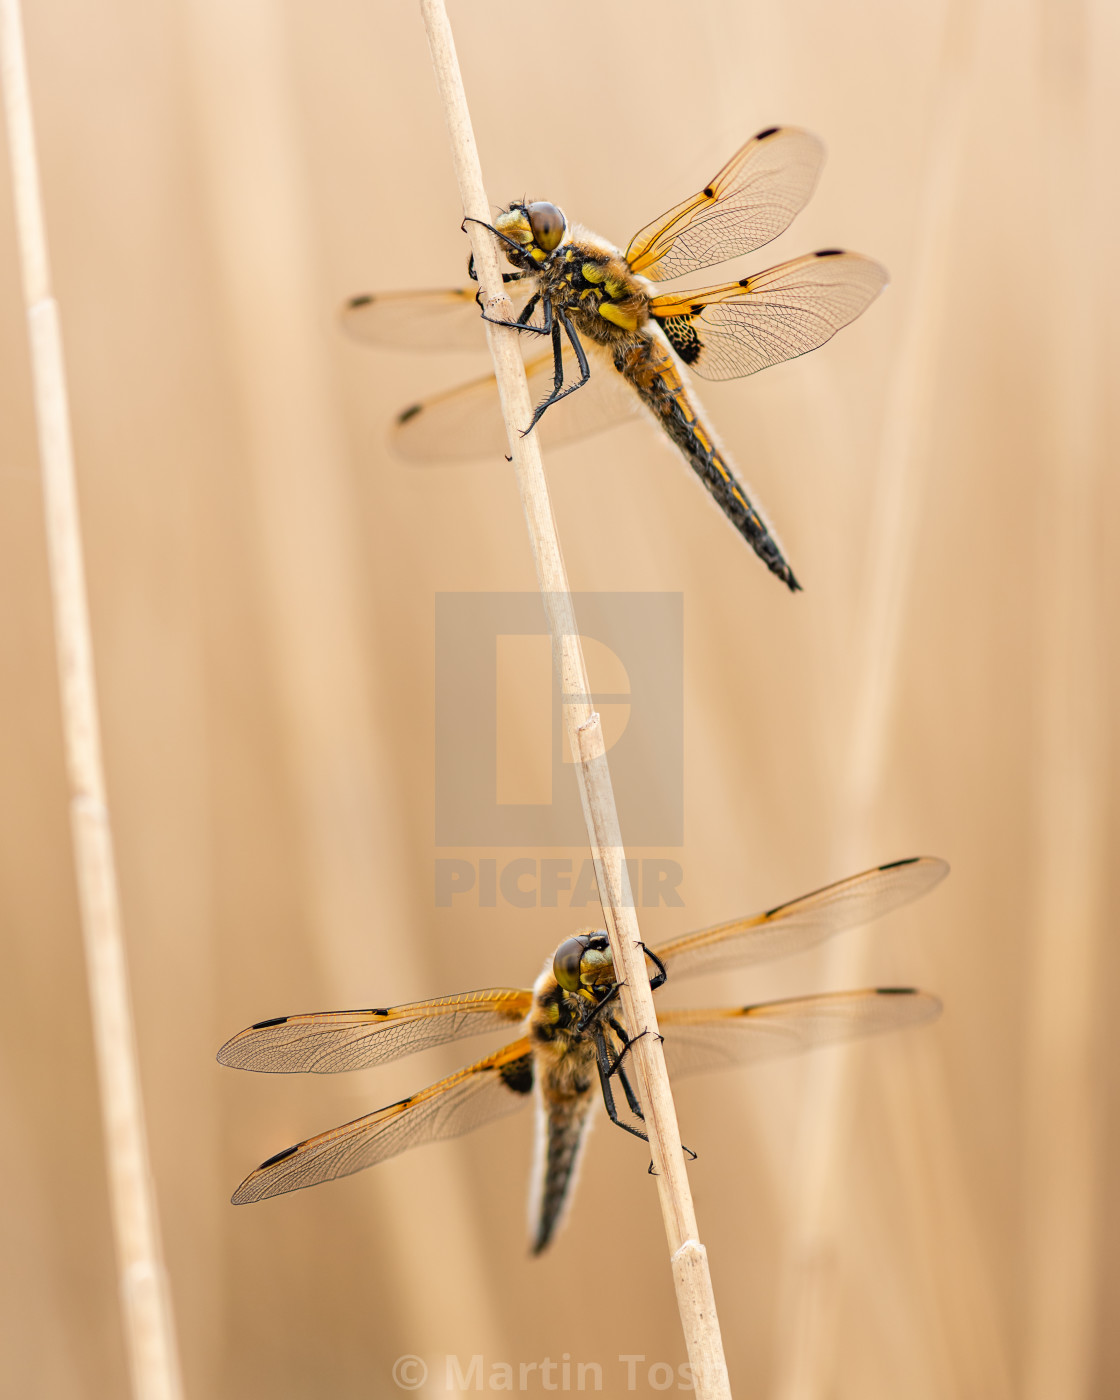 "Four Spotted Chaser dragonfly in reedbed v two roosting." stock image